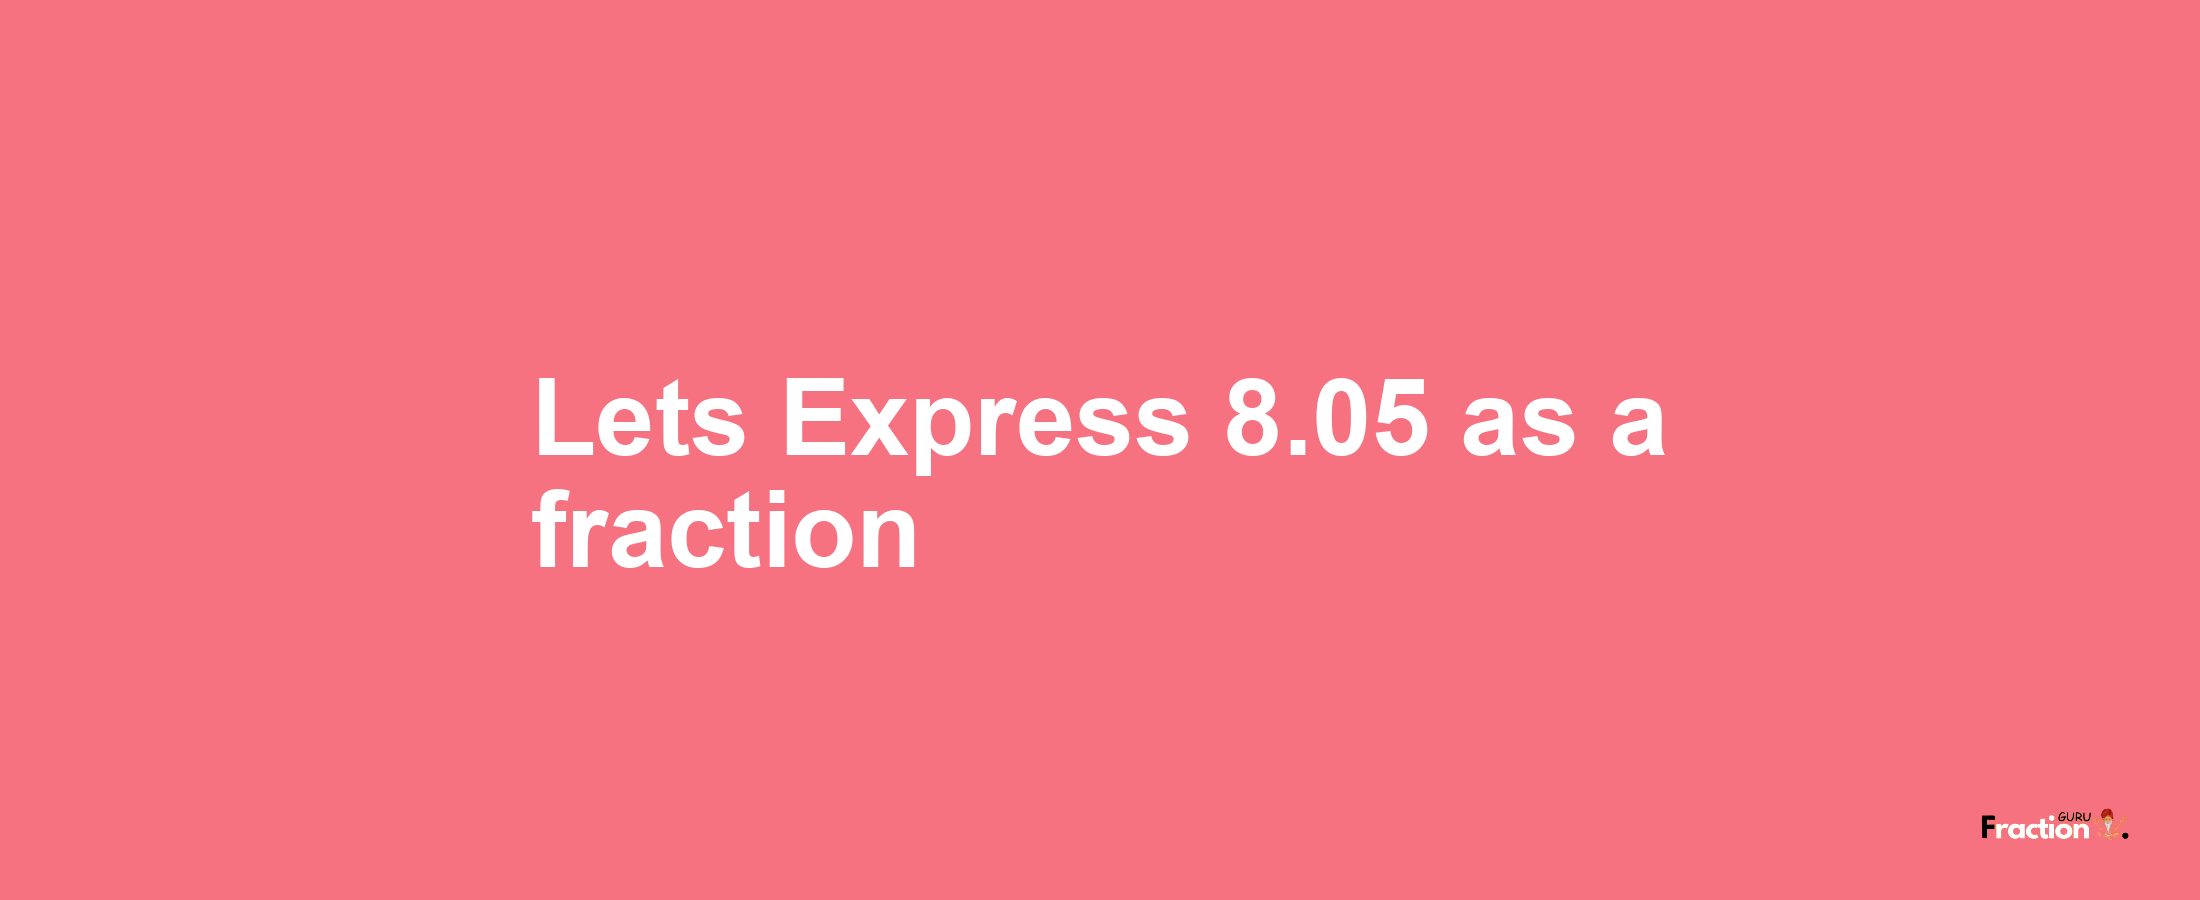 Lets Express 8.05 as afraction